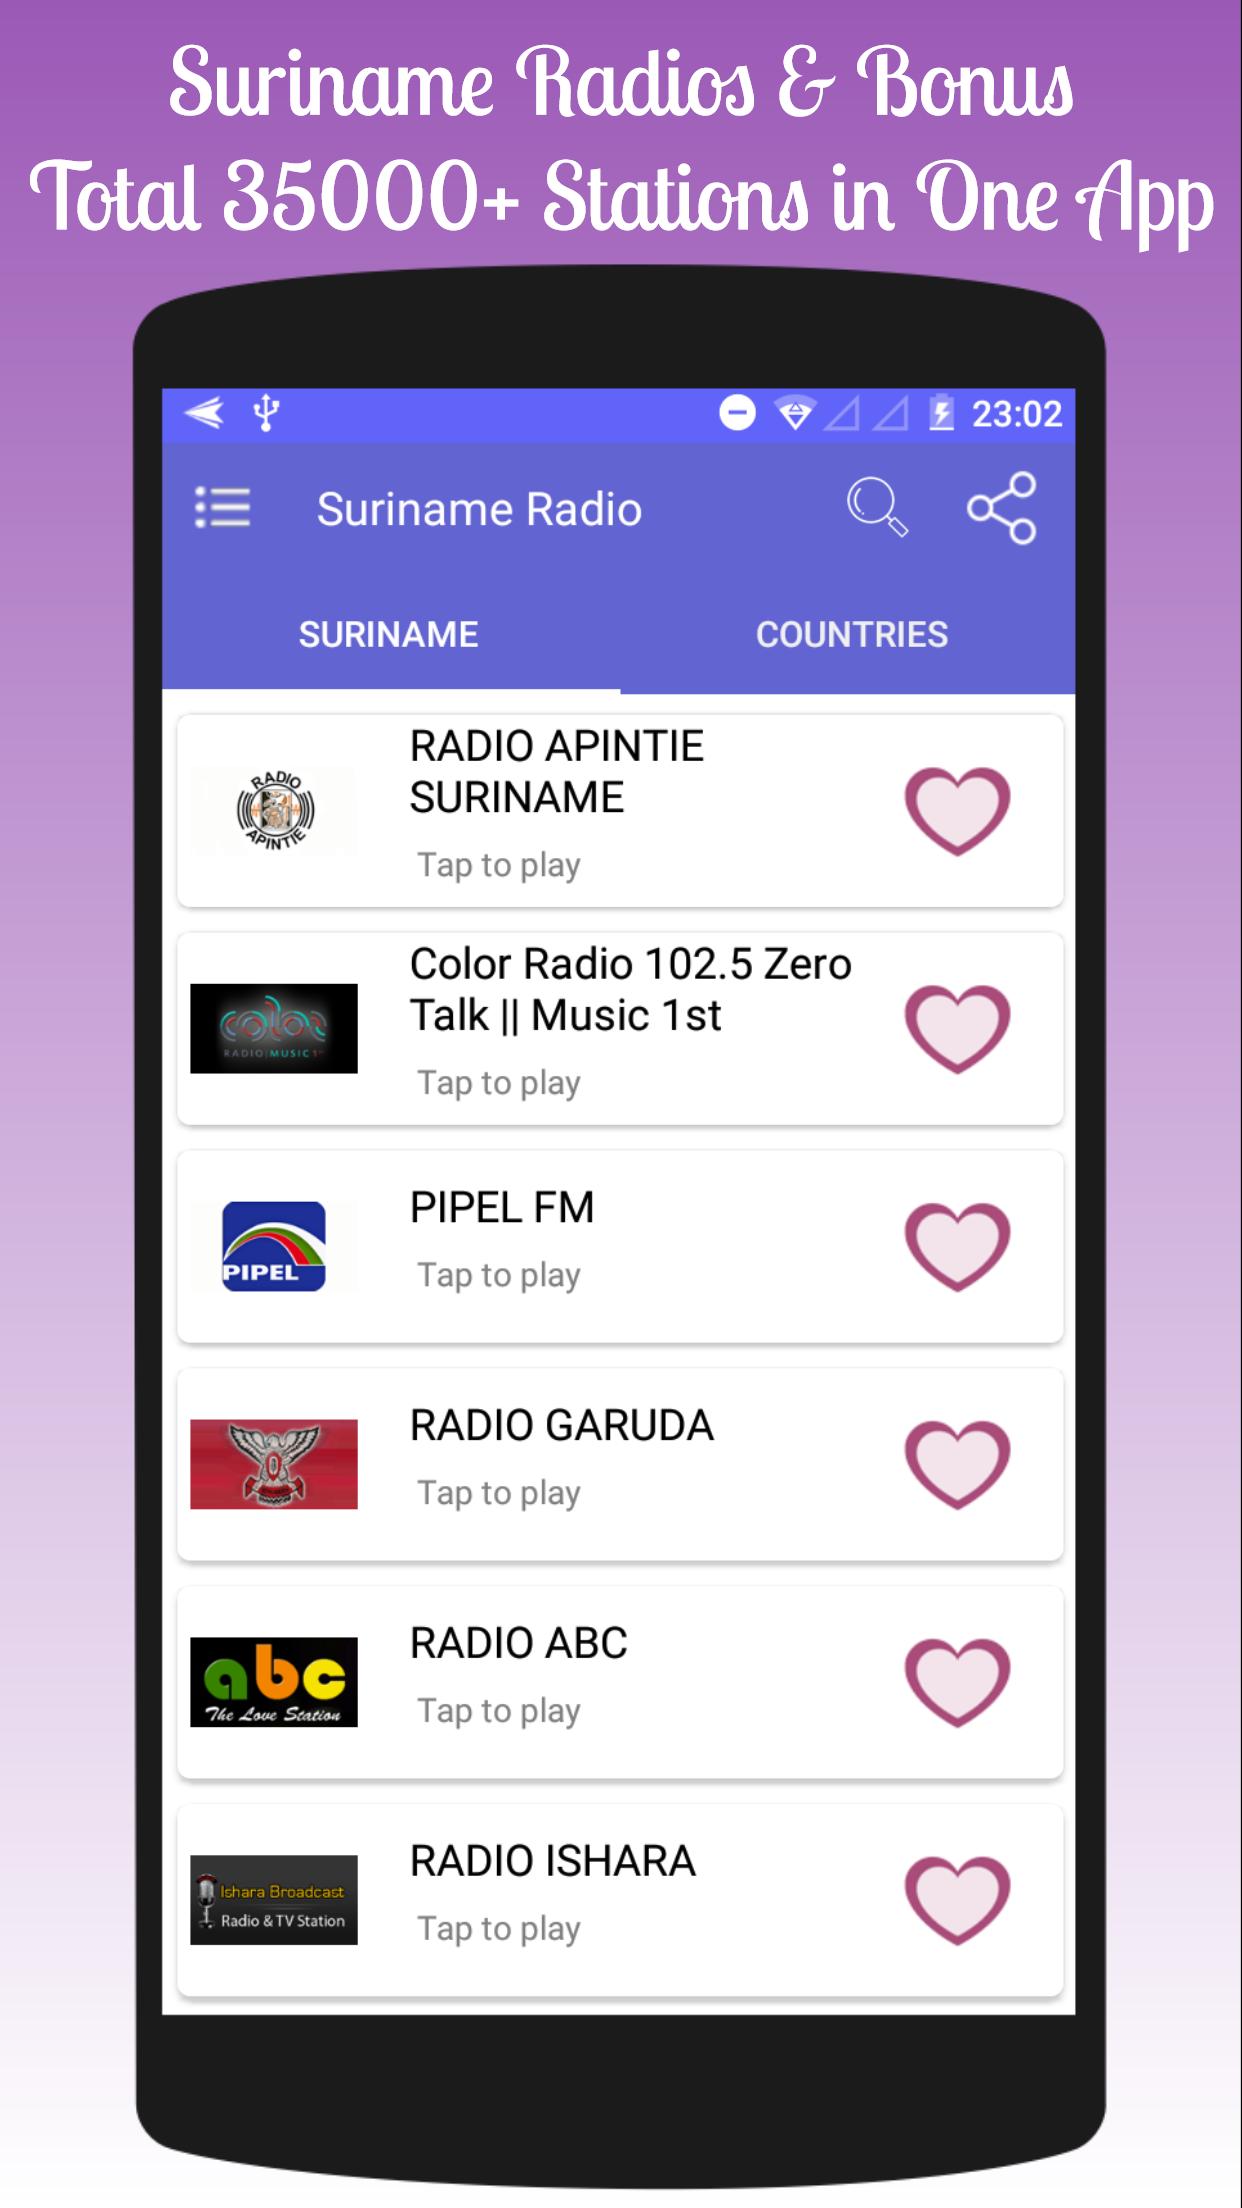 All Suriname Radios in One App APK pour Android Télécharger